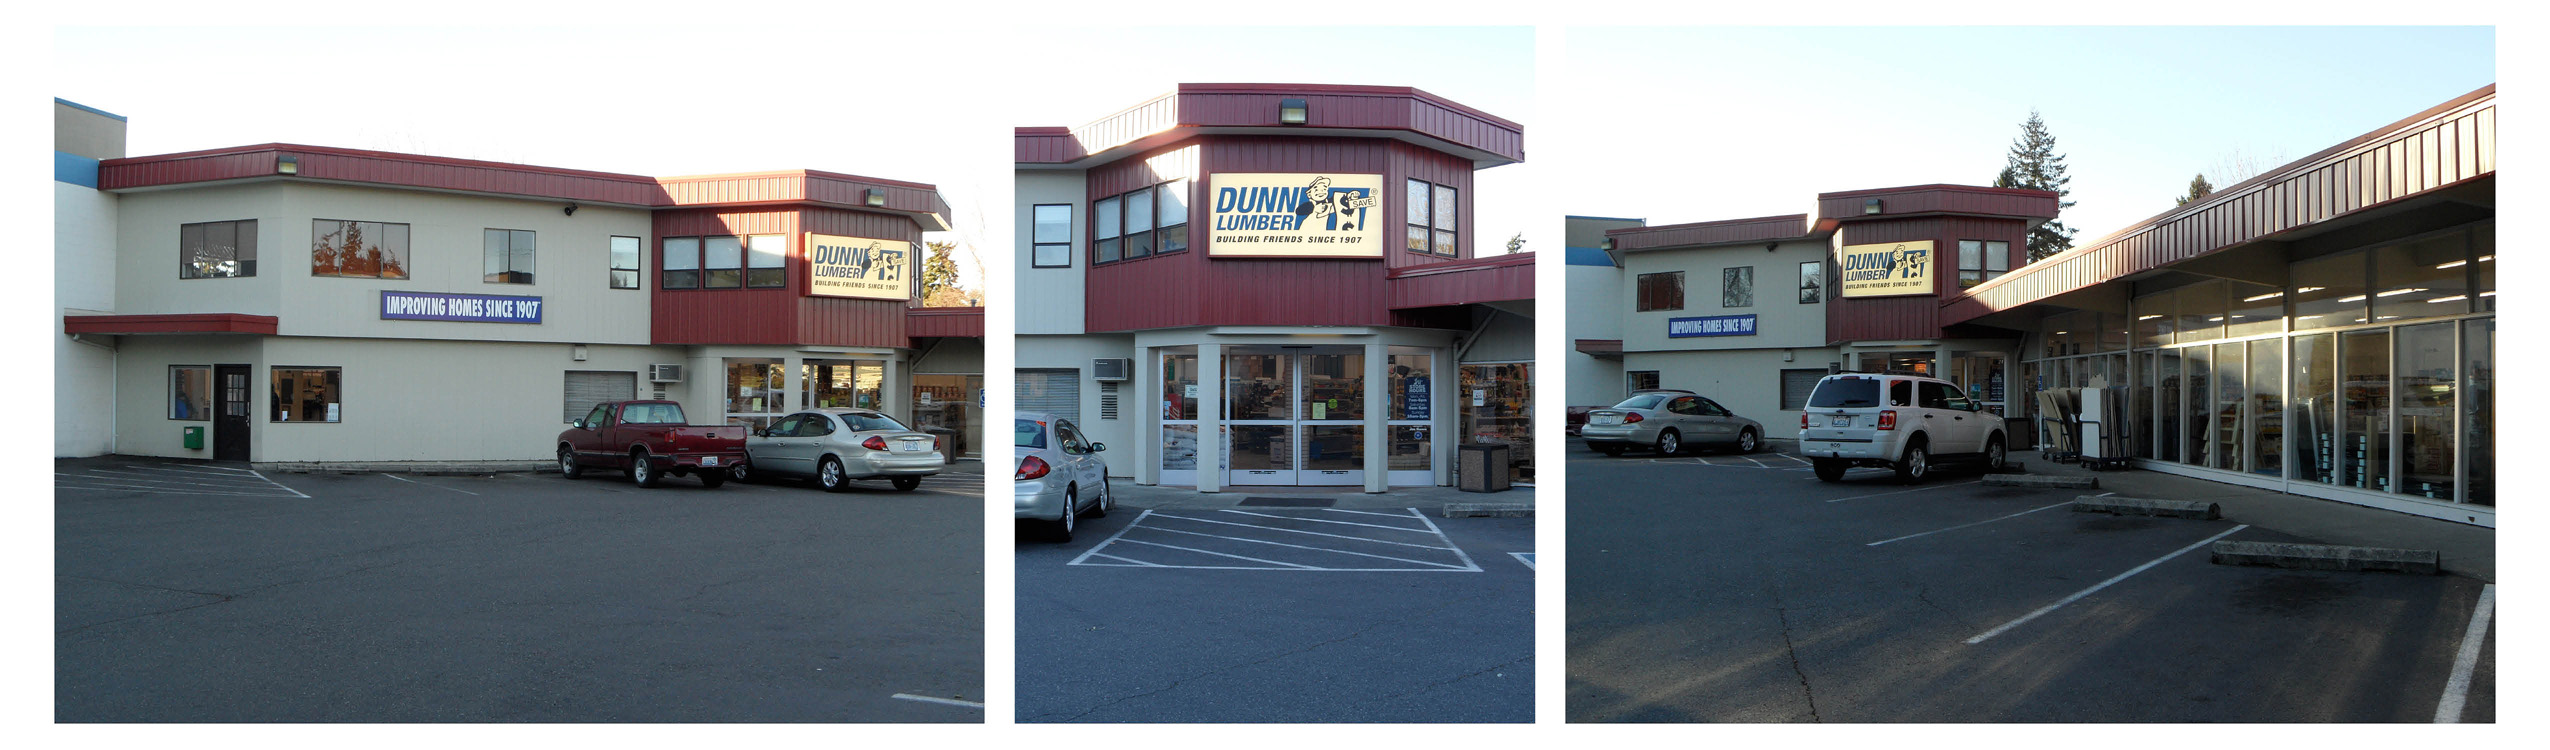 Dunn Lumber Storefront and Offices